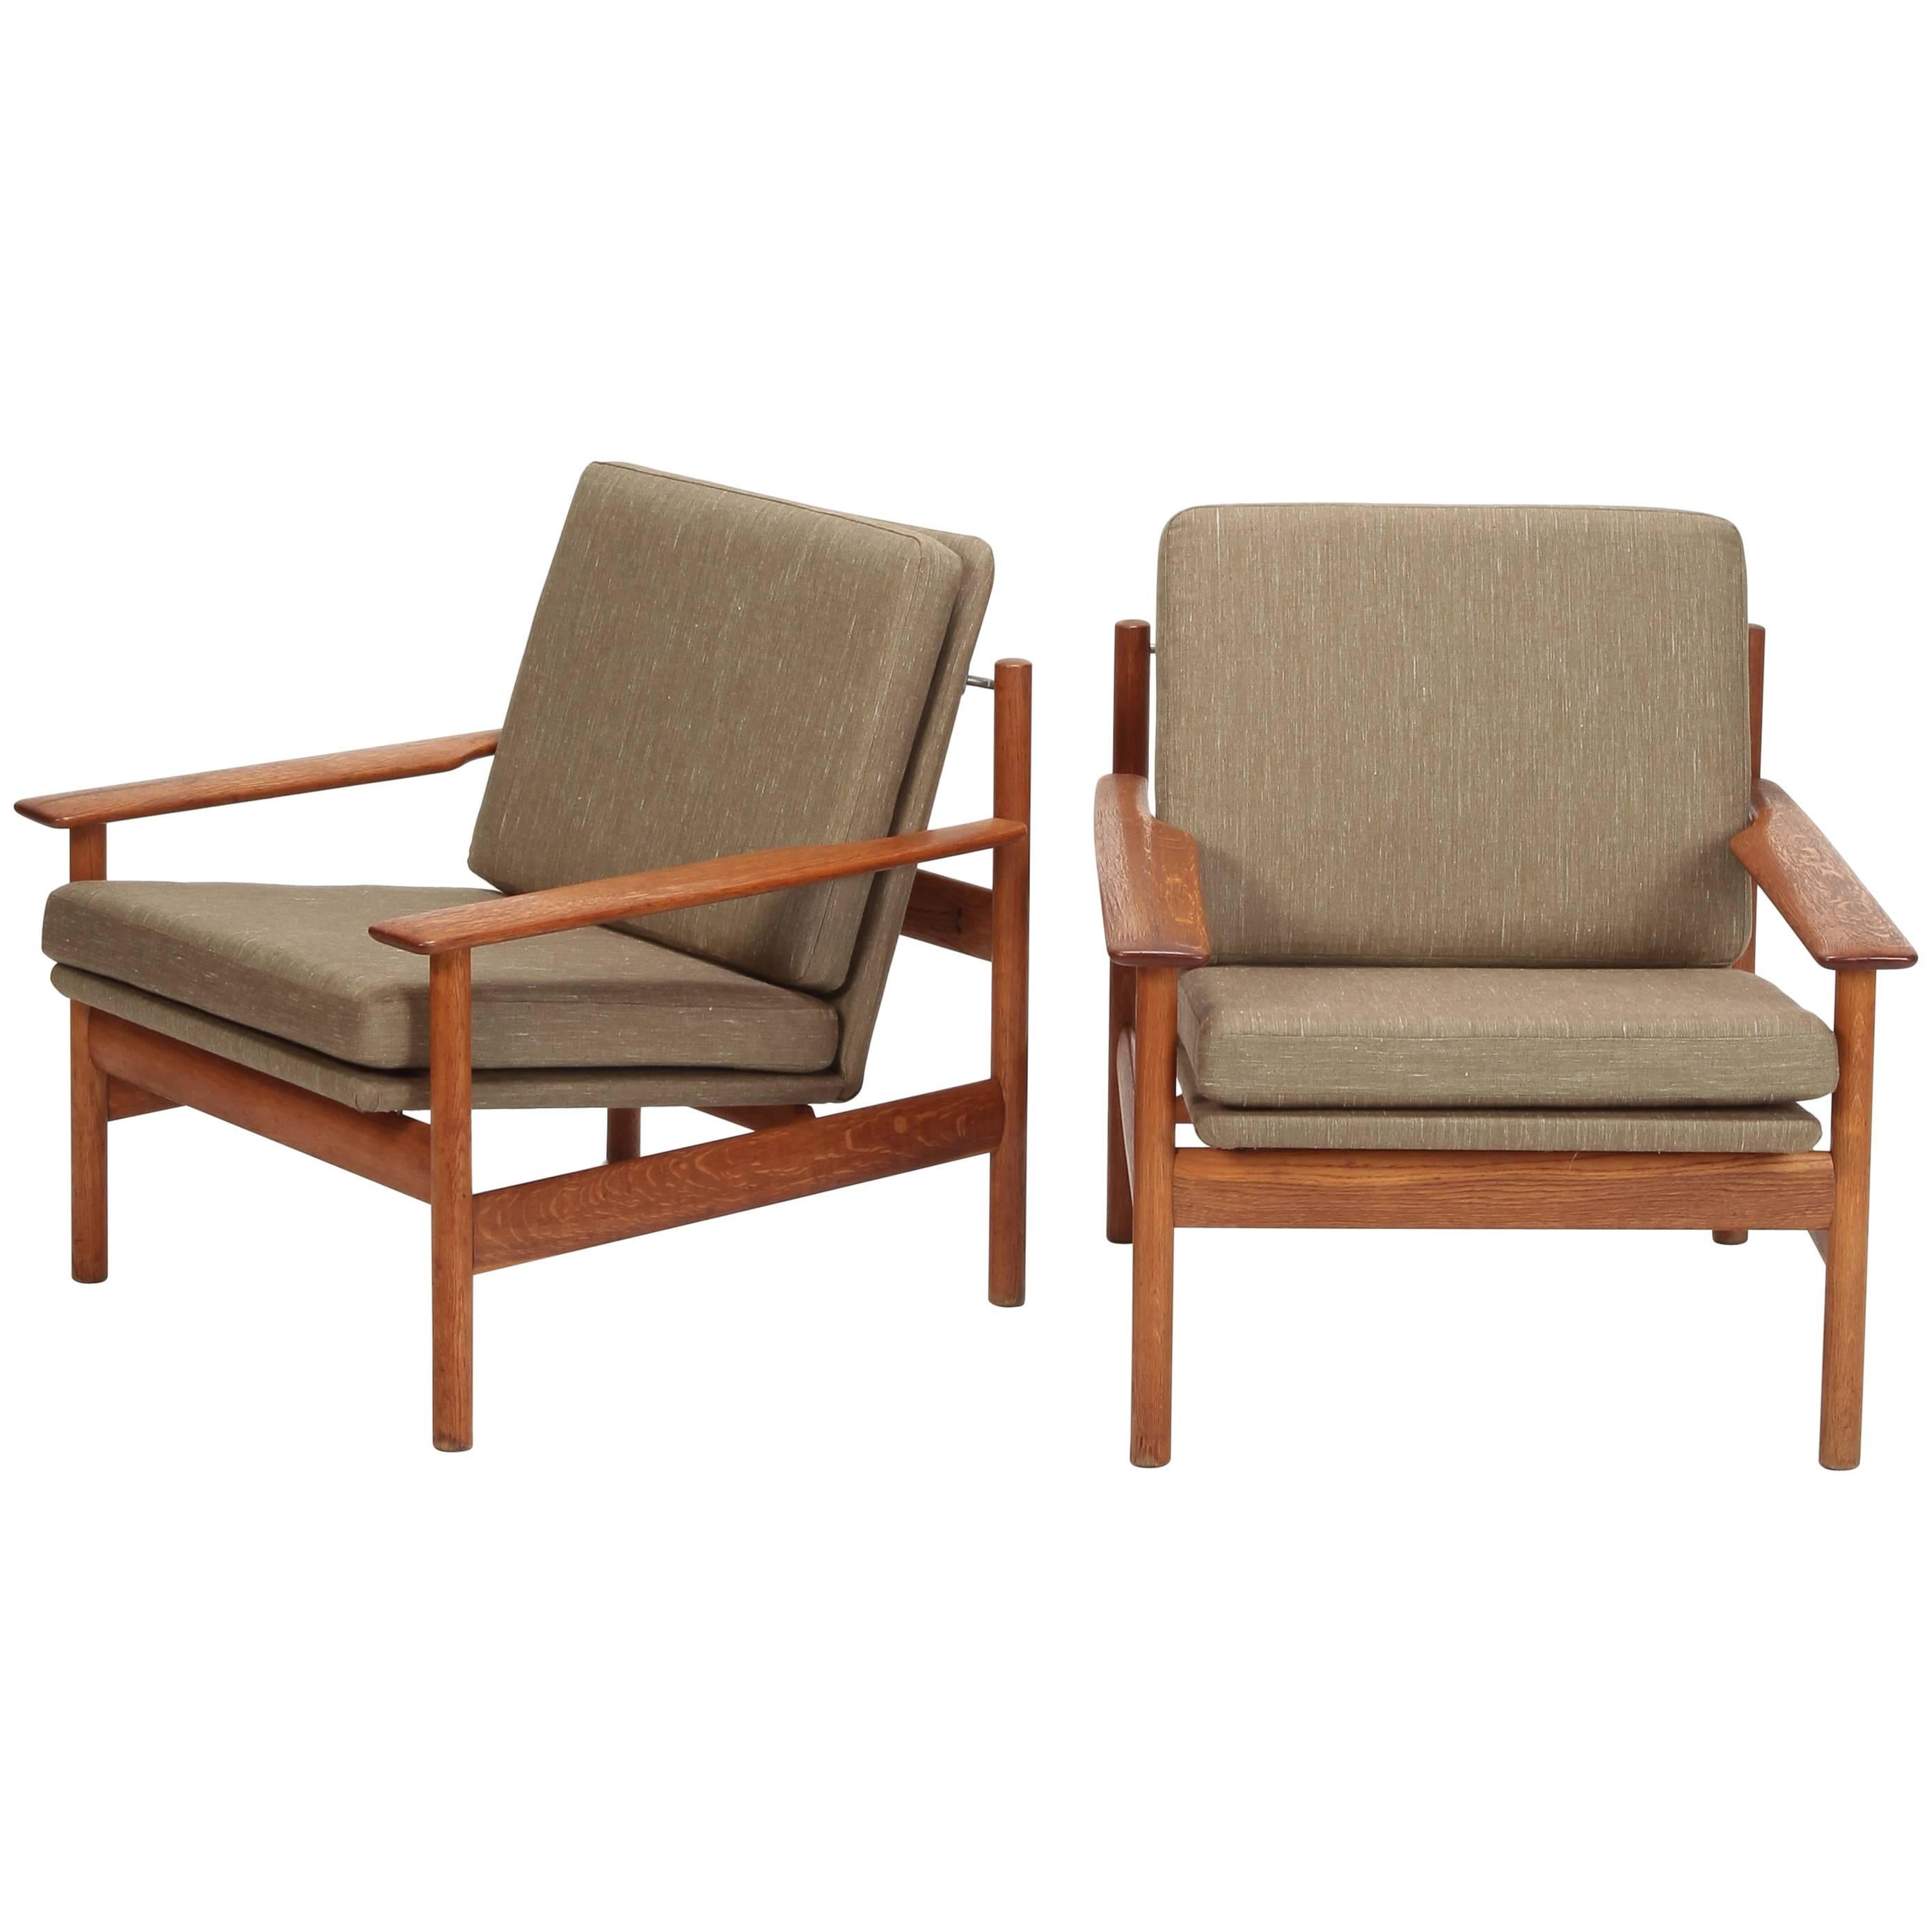 Pair of Sven Ivar Dysthe Chairs by Dokka Mobler, 1950s